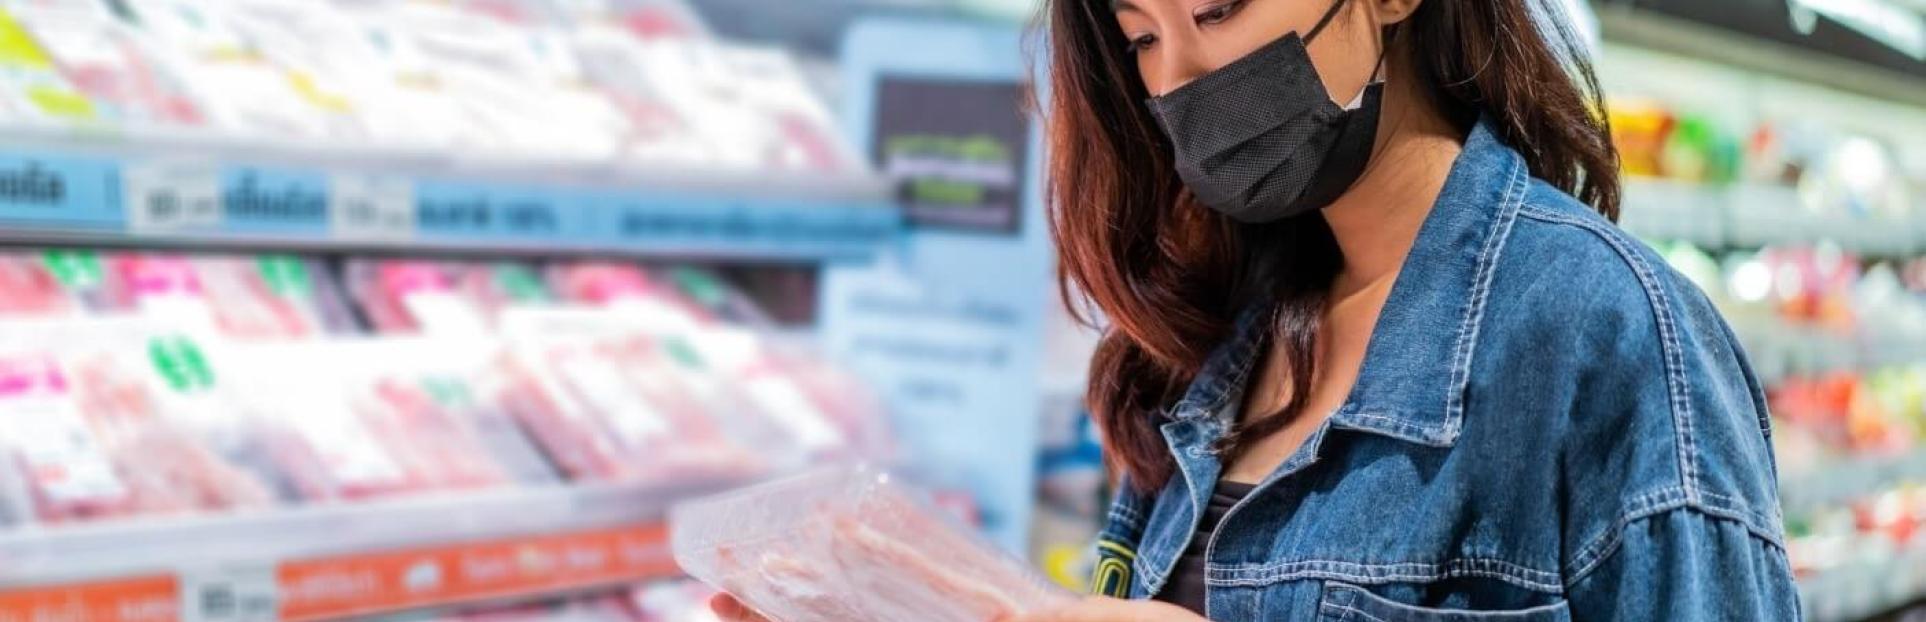 woman looking at meat in grocery store